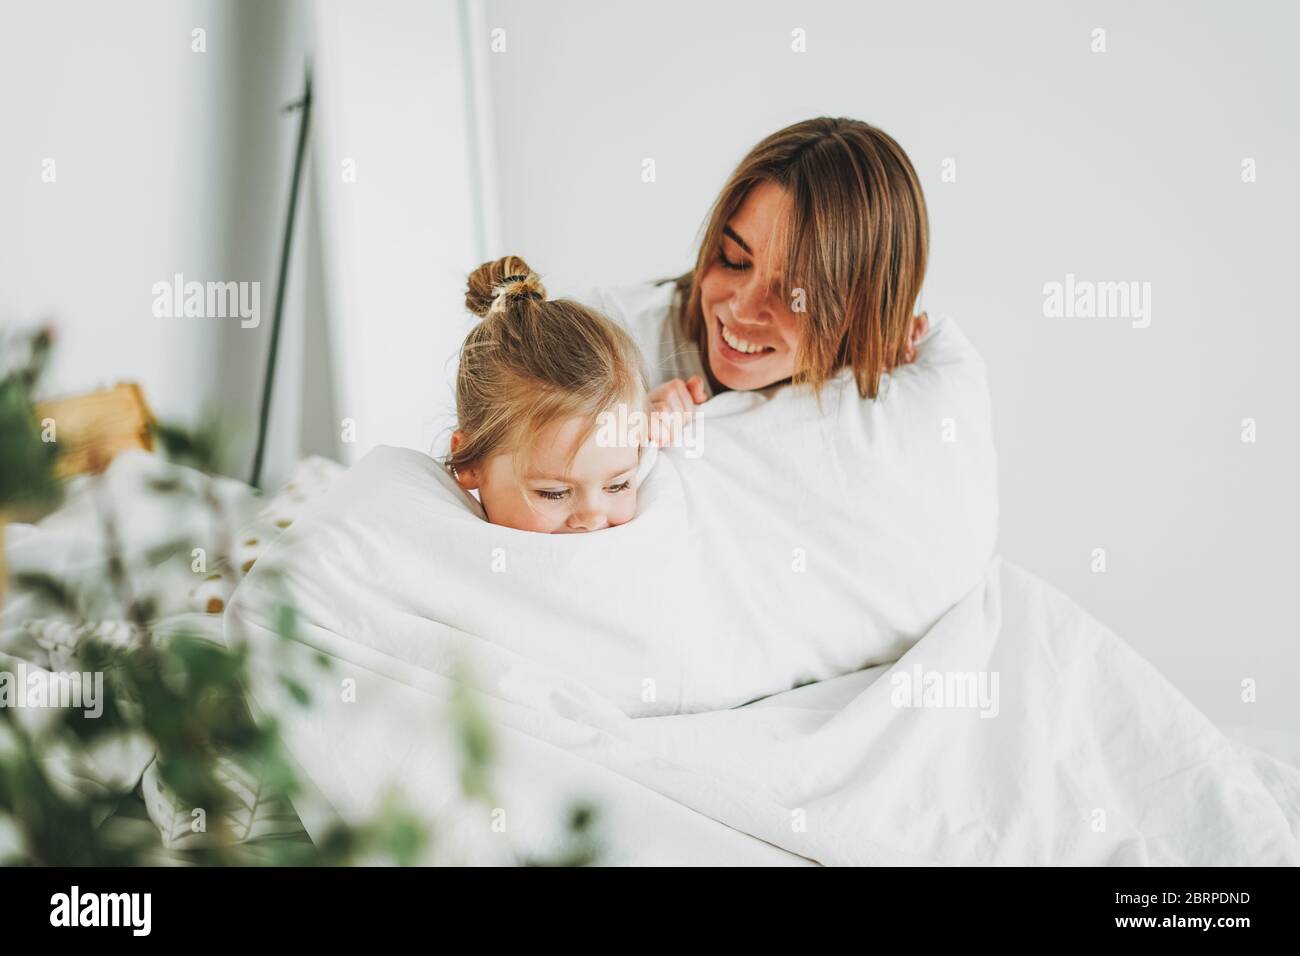 Cute toddler girl long fair hair big grey eyes looking at camera having fun with mother on bed stay at home Stock Photo